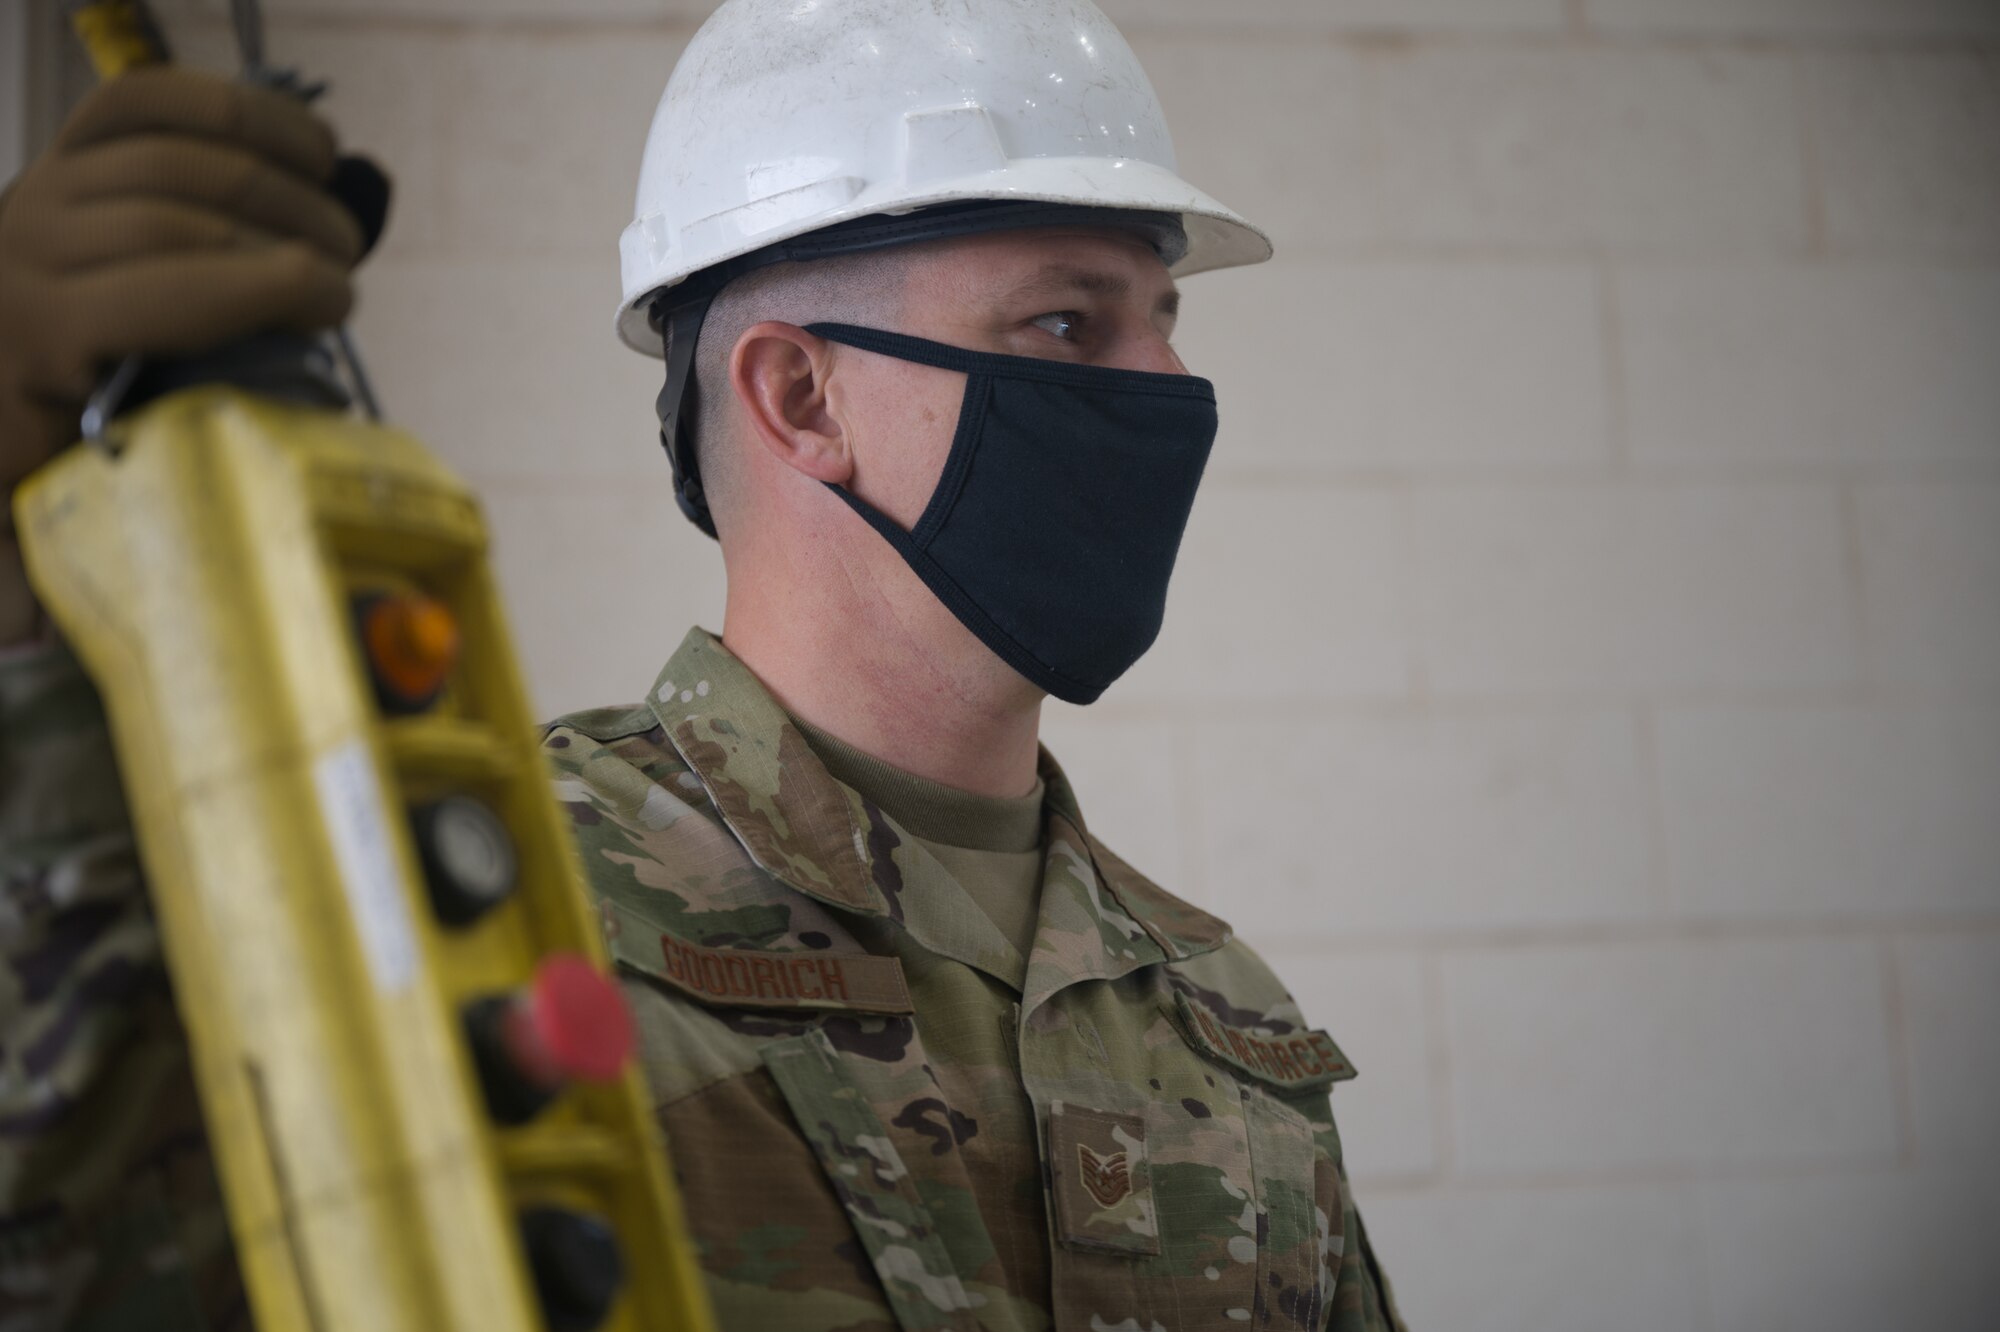 An Airman holds the the operating mechanism of an electric hoist.